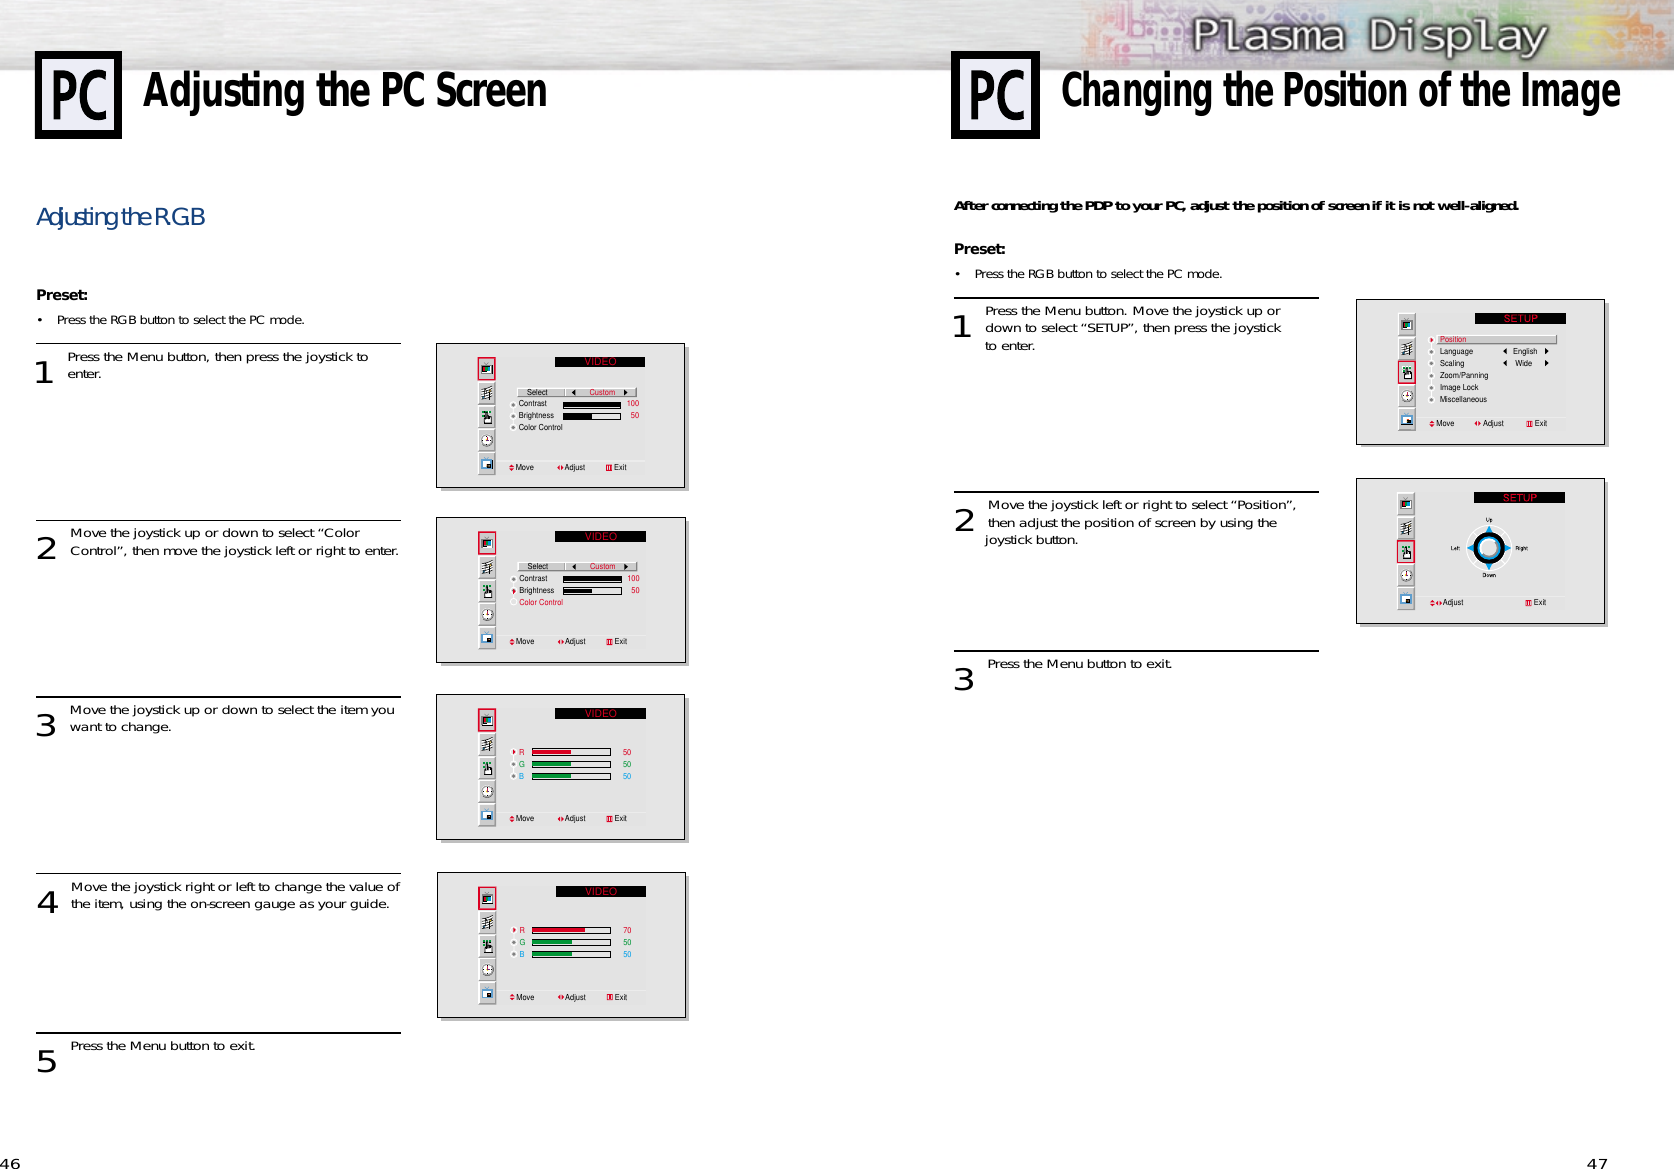 47After connecting the PDP to your PC, adjust the position of screen if it is not well-aligned.Preset: •Press the RGB button to select the PC mode. 1 Press the Menu button. Move the joystick up ordown to select “SETUP”, then press the joystick to enter. 2 Move the joystick left or right to select “Position”,then adjust the position of screen by using the joystick button.  3 Press the Menu button to exit.PositionLanguage           EnglishScaling            WideZoom/PanningImage LockMiscellaneousMove              Adjust               ExitAdjust                                  Exit46Adjusting the R.G.BPreset: •Press the RGB button to select the PC mode. 1 Press the Menu button, then press the joystick toenter.2 Move the joystick up or down to select “Color Control”, then move the joystick left or right to enter.3 Move the joystick up or down to select the item youwant to change.4 Move the joystick right or left to change the value ofthe item, using the on-screen gauge as your guide.5 Press the Menu button to exit.Adjusting the PC ScreenVIDEO    SelectContrastBrightnessColor ControlMove               Adjust              ExitCustom                  100                    50VIDEO    SelectContrastBrightnessColor ControlMove               Adjust              ExitCustom                  100                    50VIDEORGB505050Move               Adjust              ExitVIDEORGB705050Move               Adjust              ExitChanging the Position of the Image